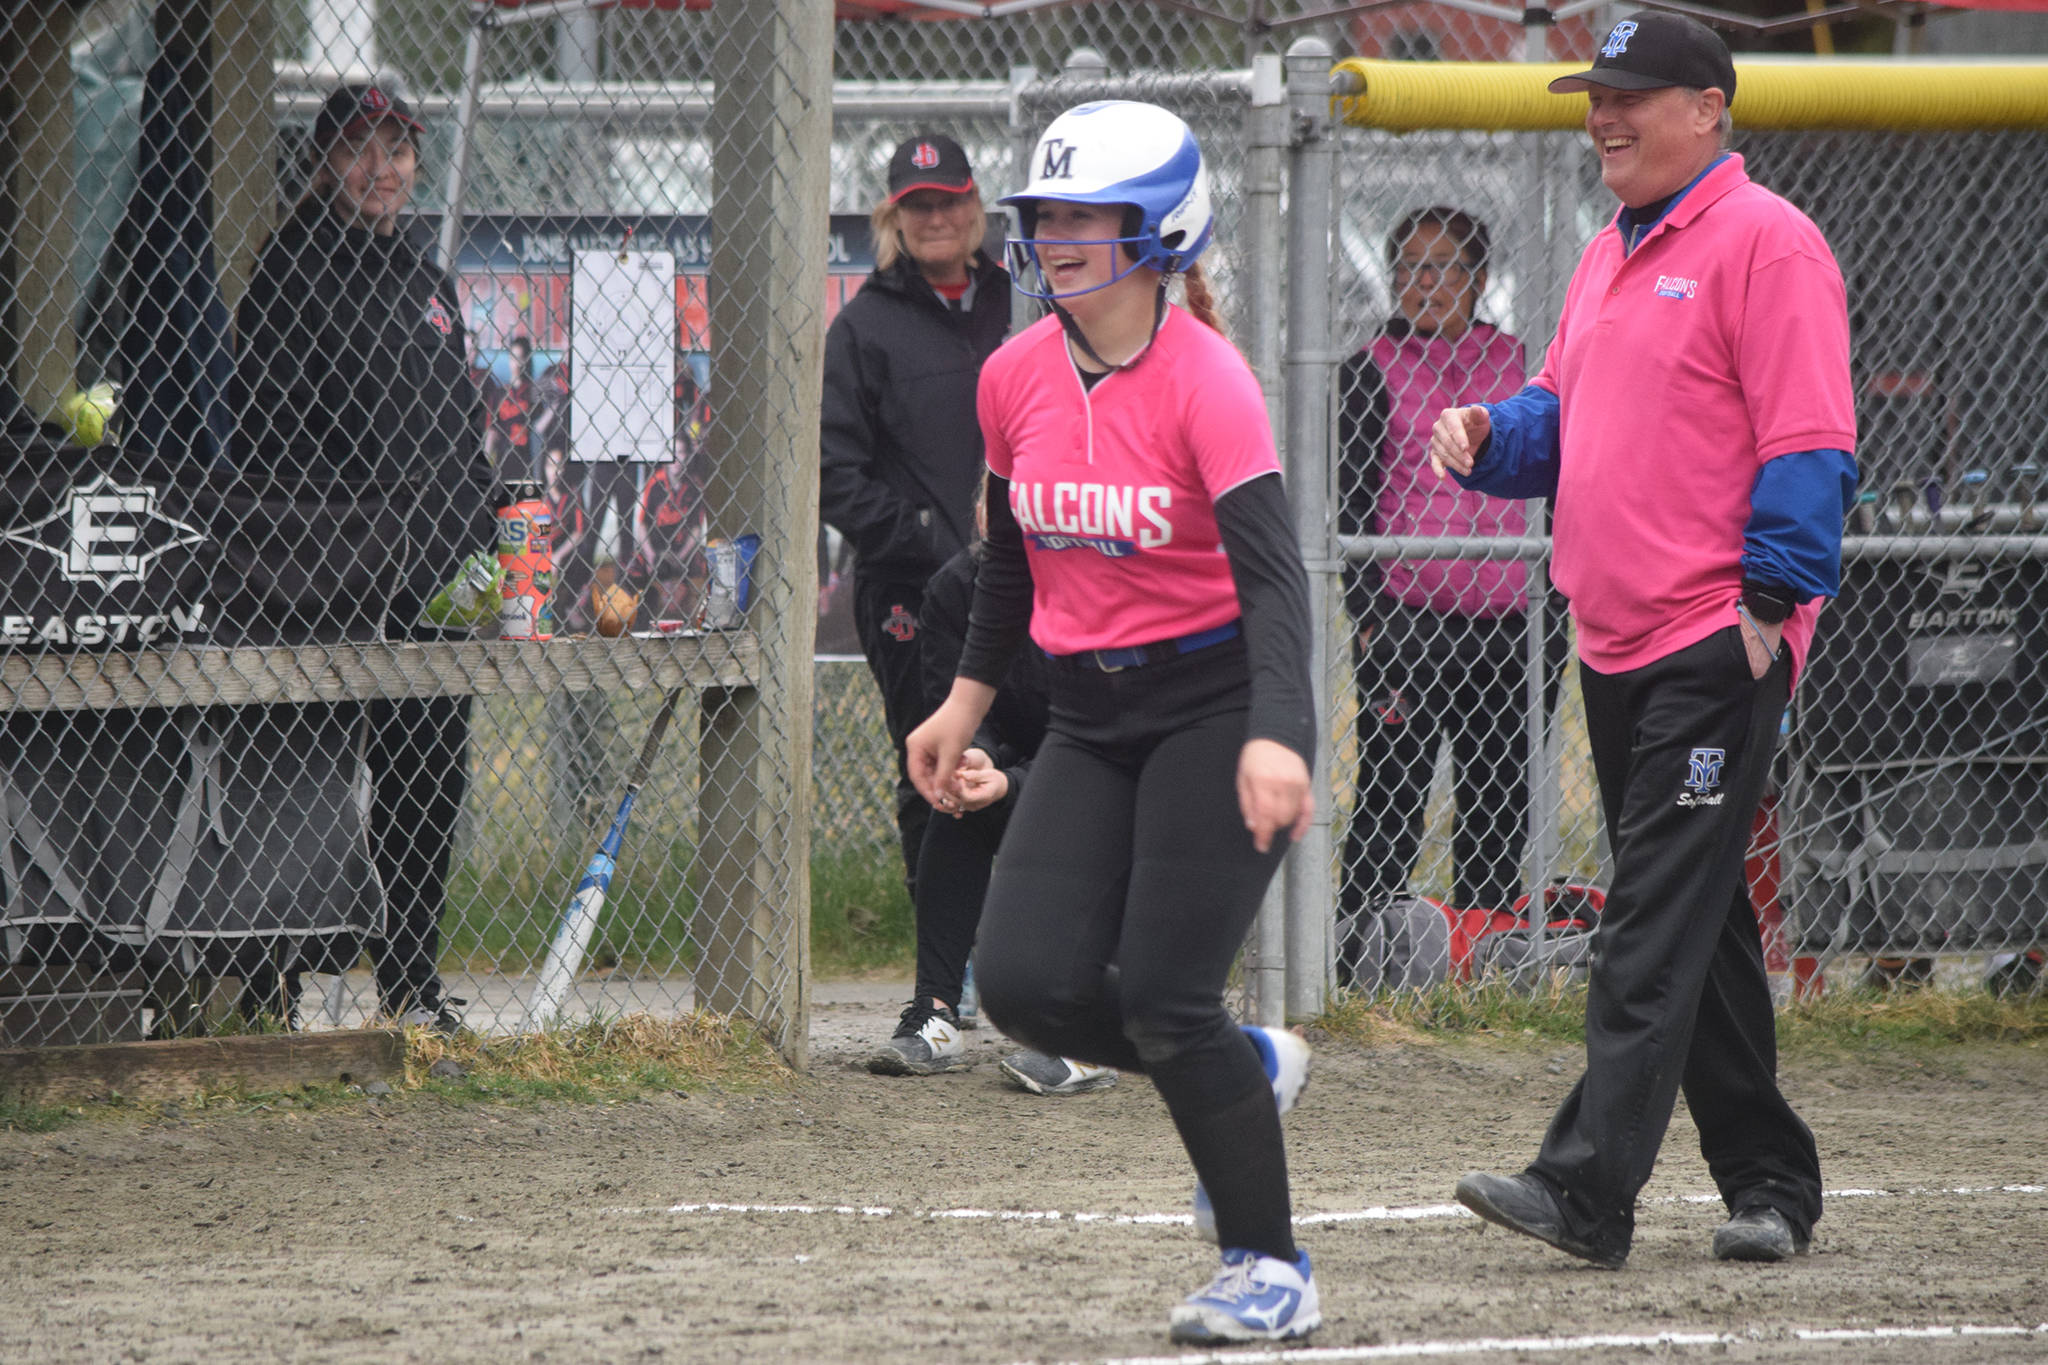 Thunder Mountain High School freshman Sydney Strong runs past coach John Boucher and toward her teammates assembled at home plate after hitting a home run in the first inning of a Southeast Conference softball game at Melvin Park on Friday, May 3, 2019. (Nolin Ainsworth | Juneau Empire)